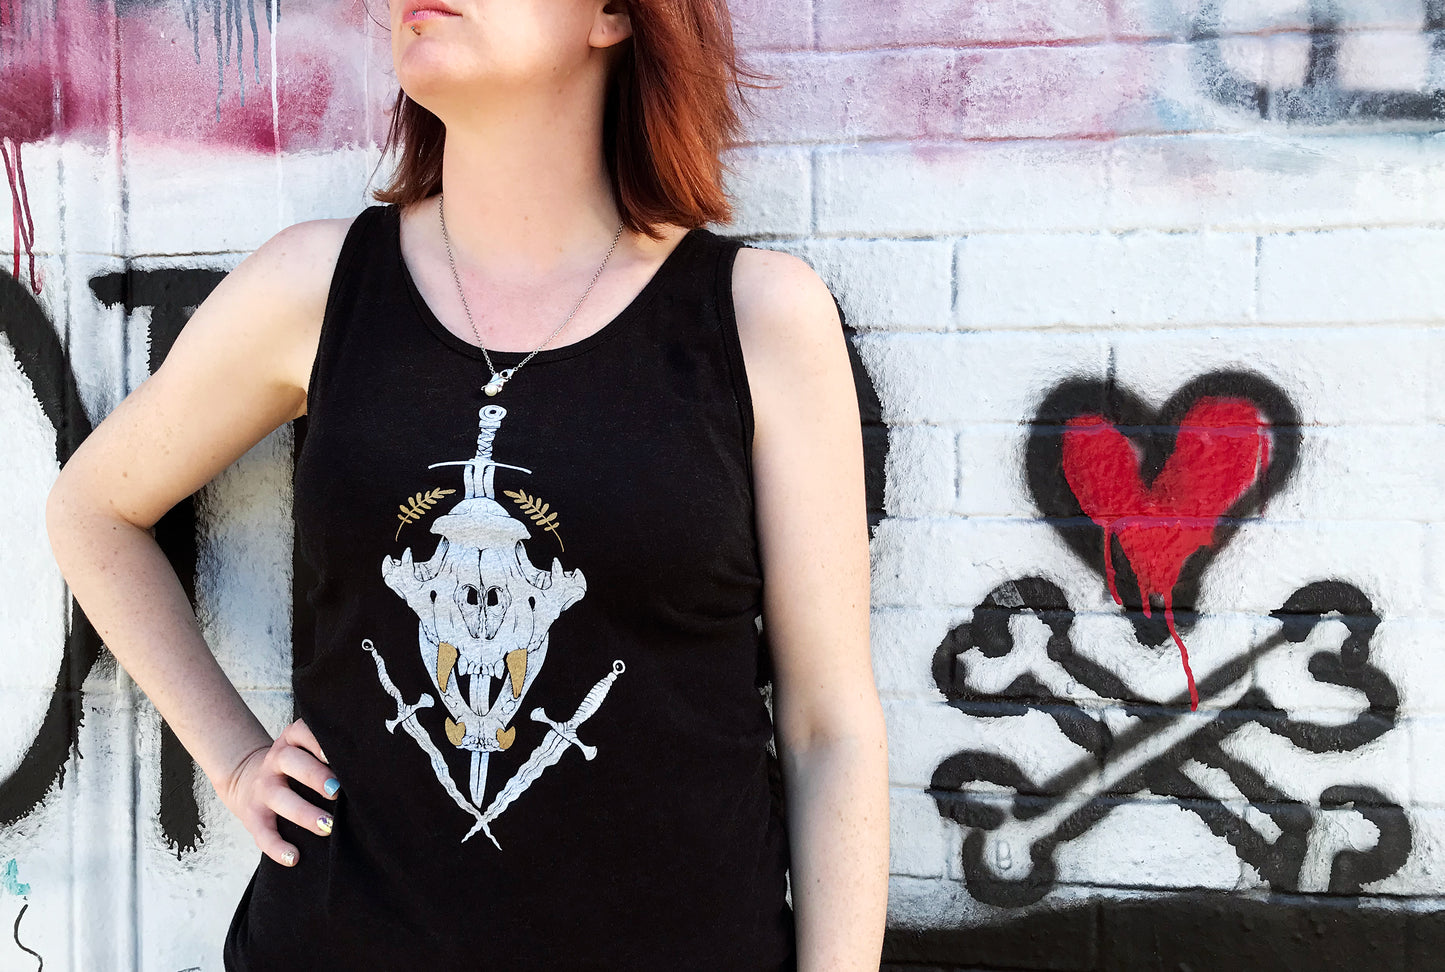 Black tank top with white tiger skull and daggers on model in front of graffiti wall.